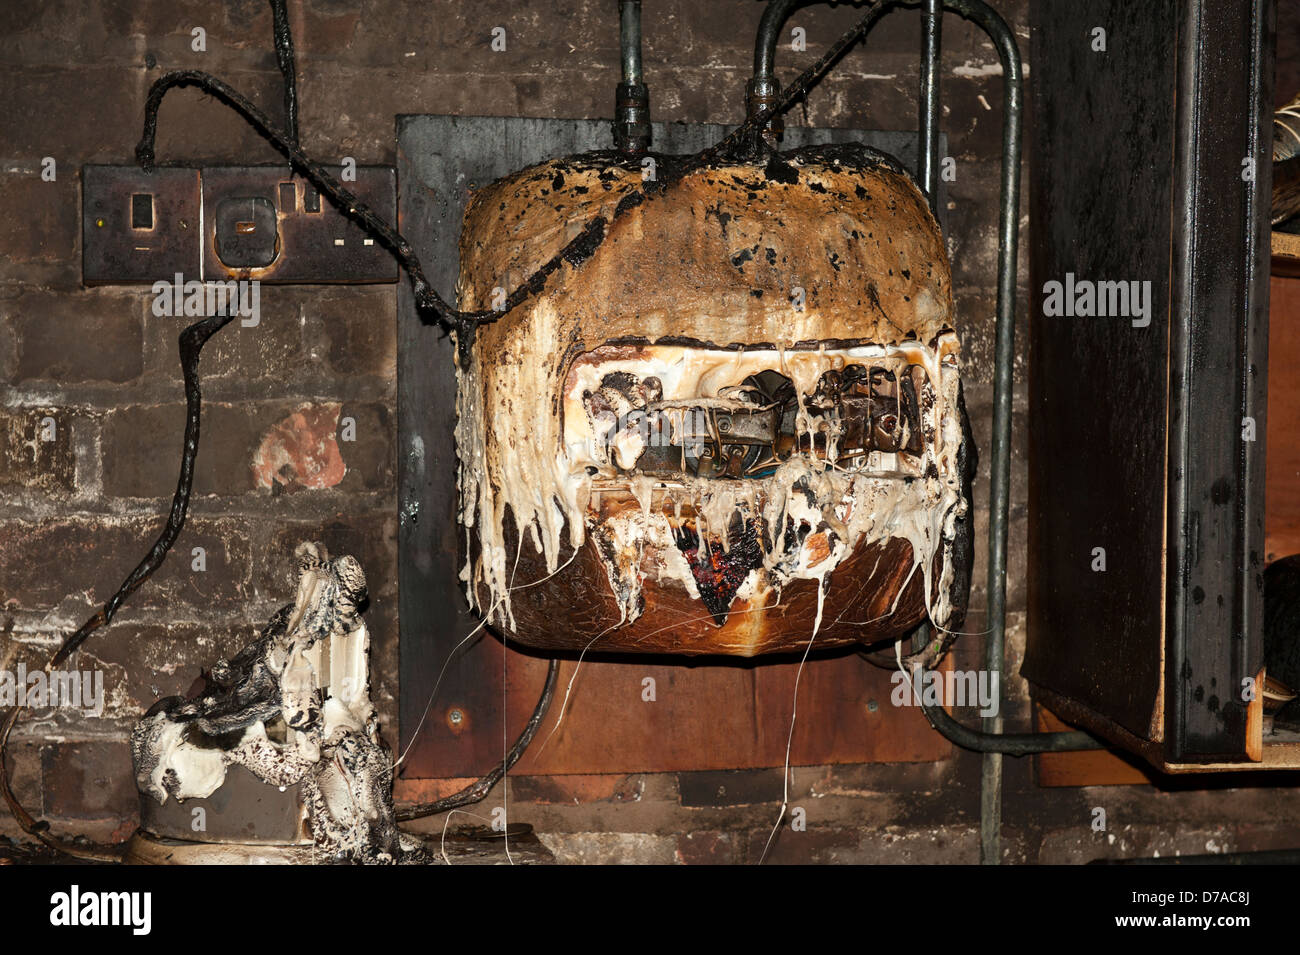 Hot Water Electric Heater fire melted faulty Stock Photo